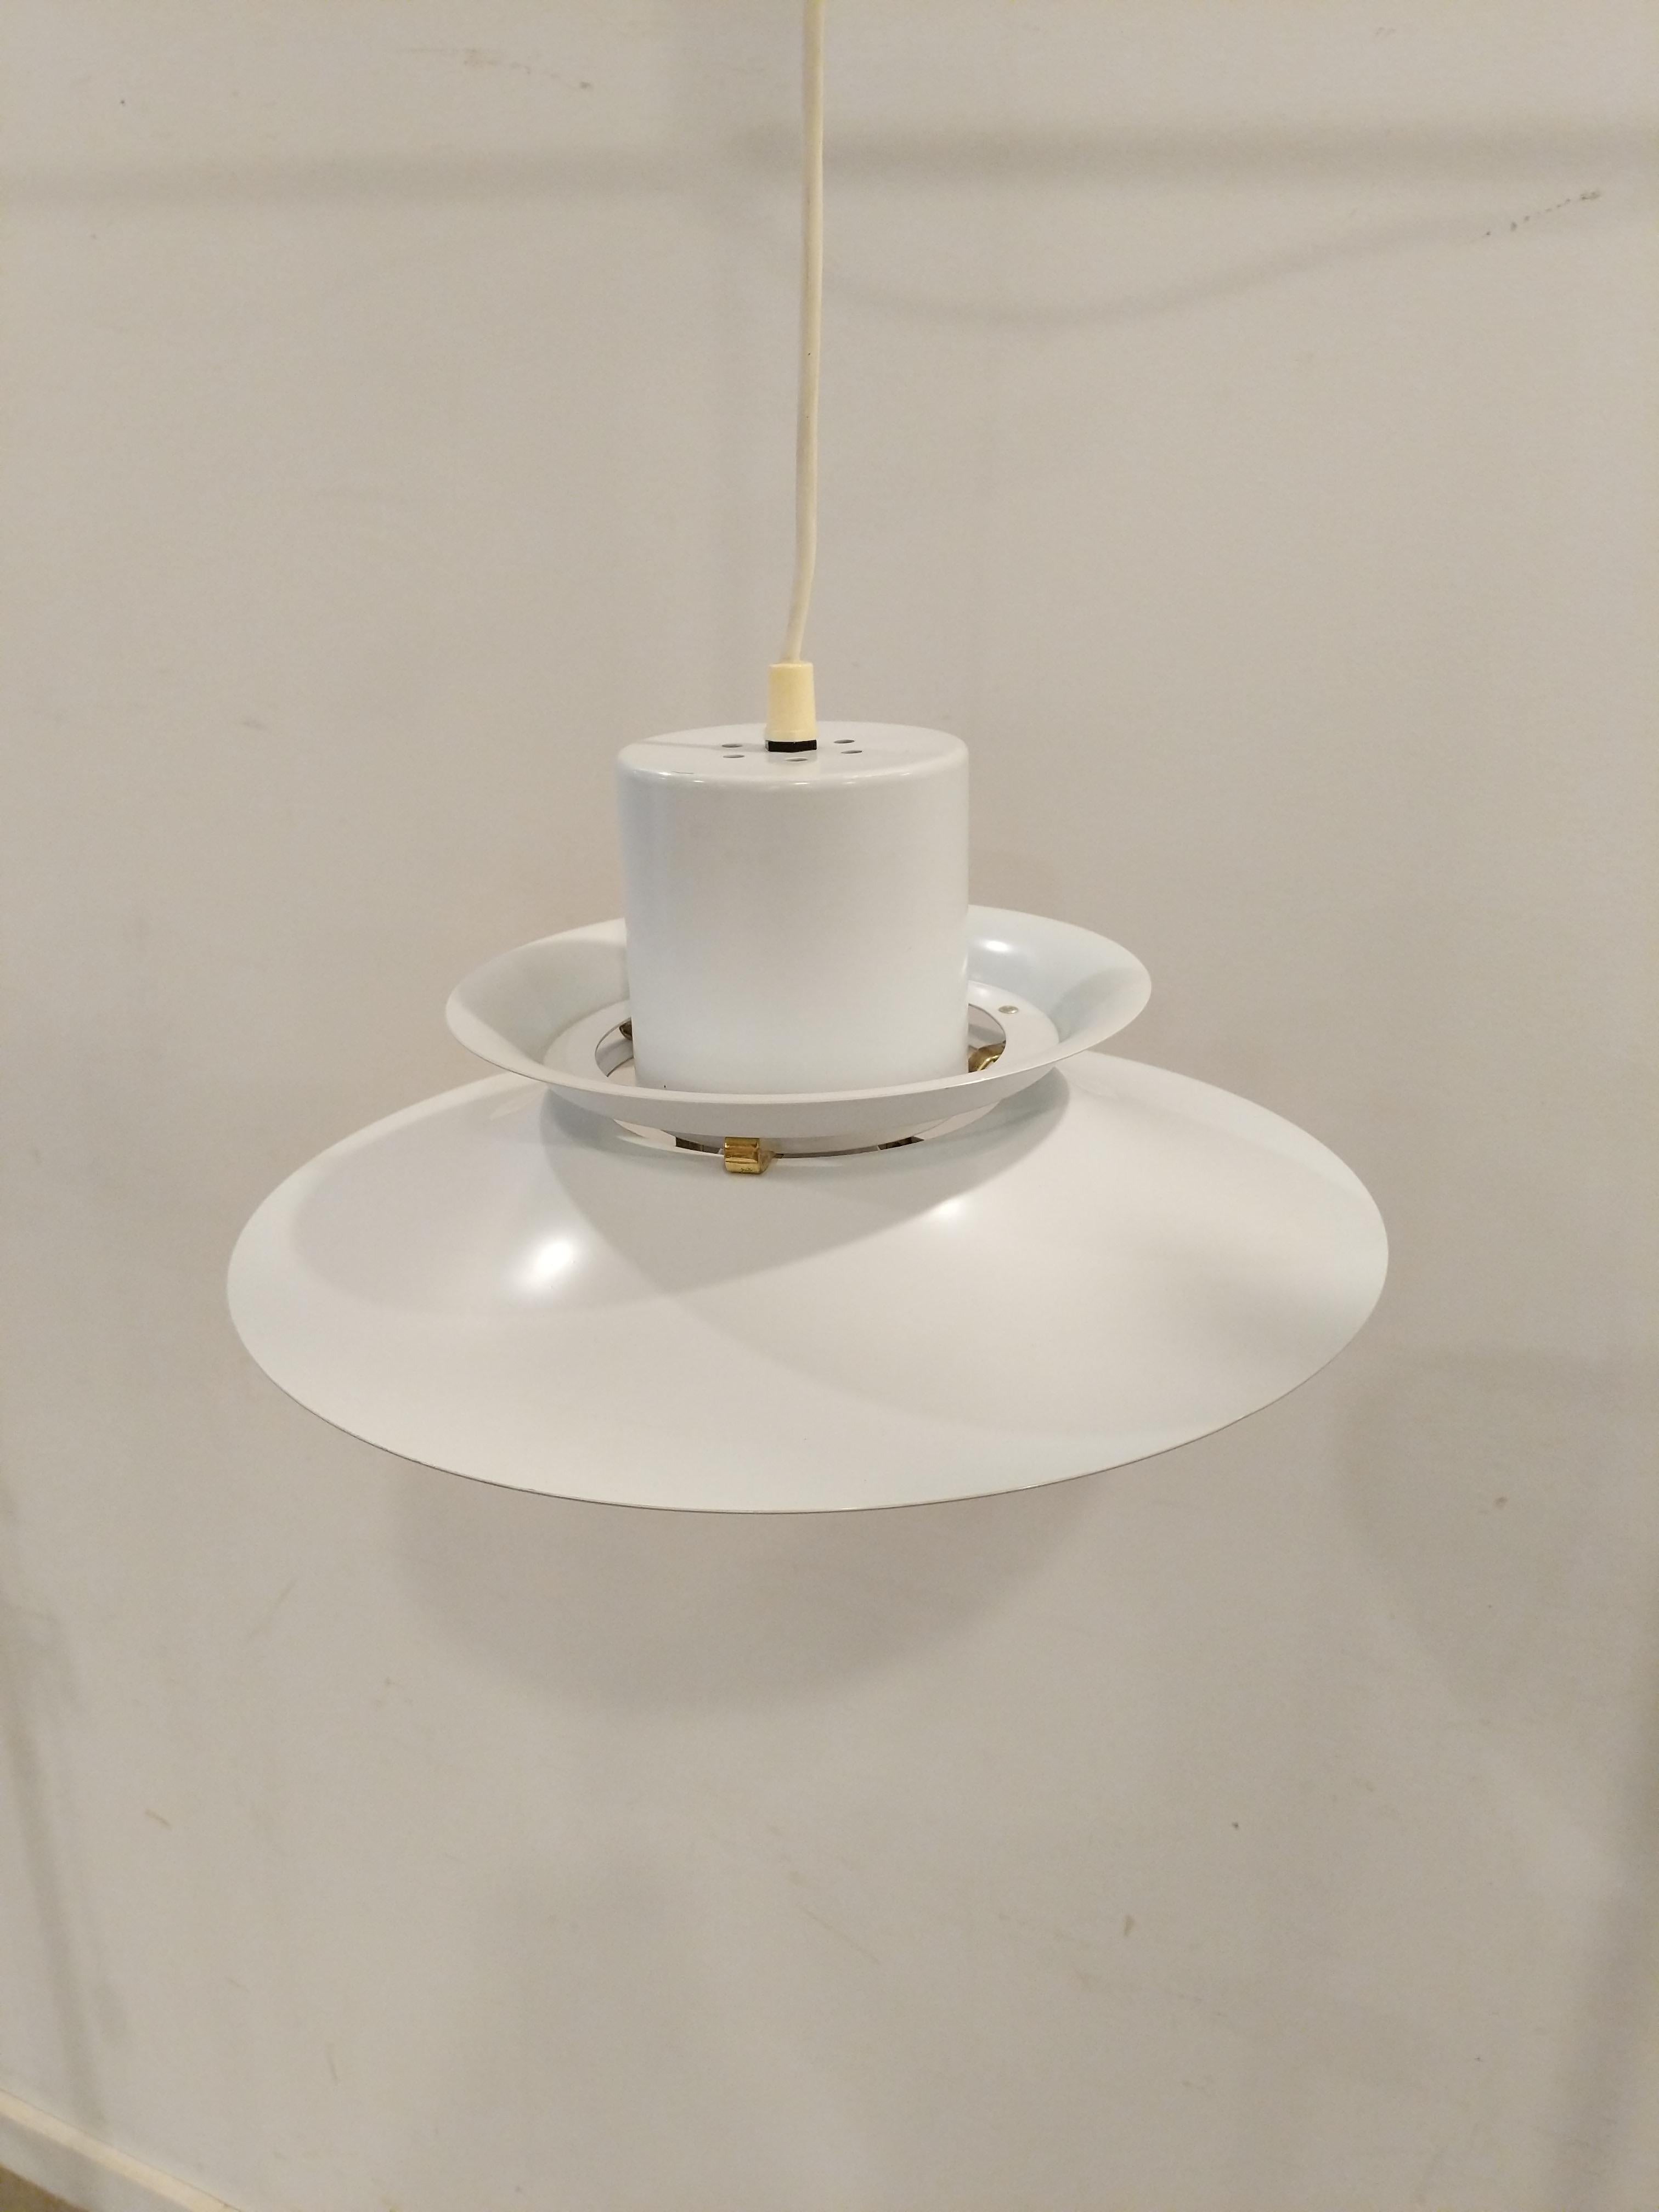 Authentic vintage mid century Danish / Scandinavian Modern hanging lamp / ceiling lamp / pendant light.

Imported directly from Denmark, this lamp is in great shape overall with minor wear from age (see photos).

The lamp is metal.

Dimensions:
14”